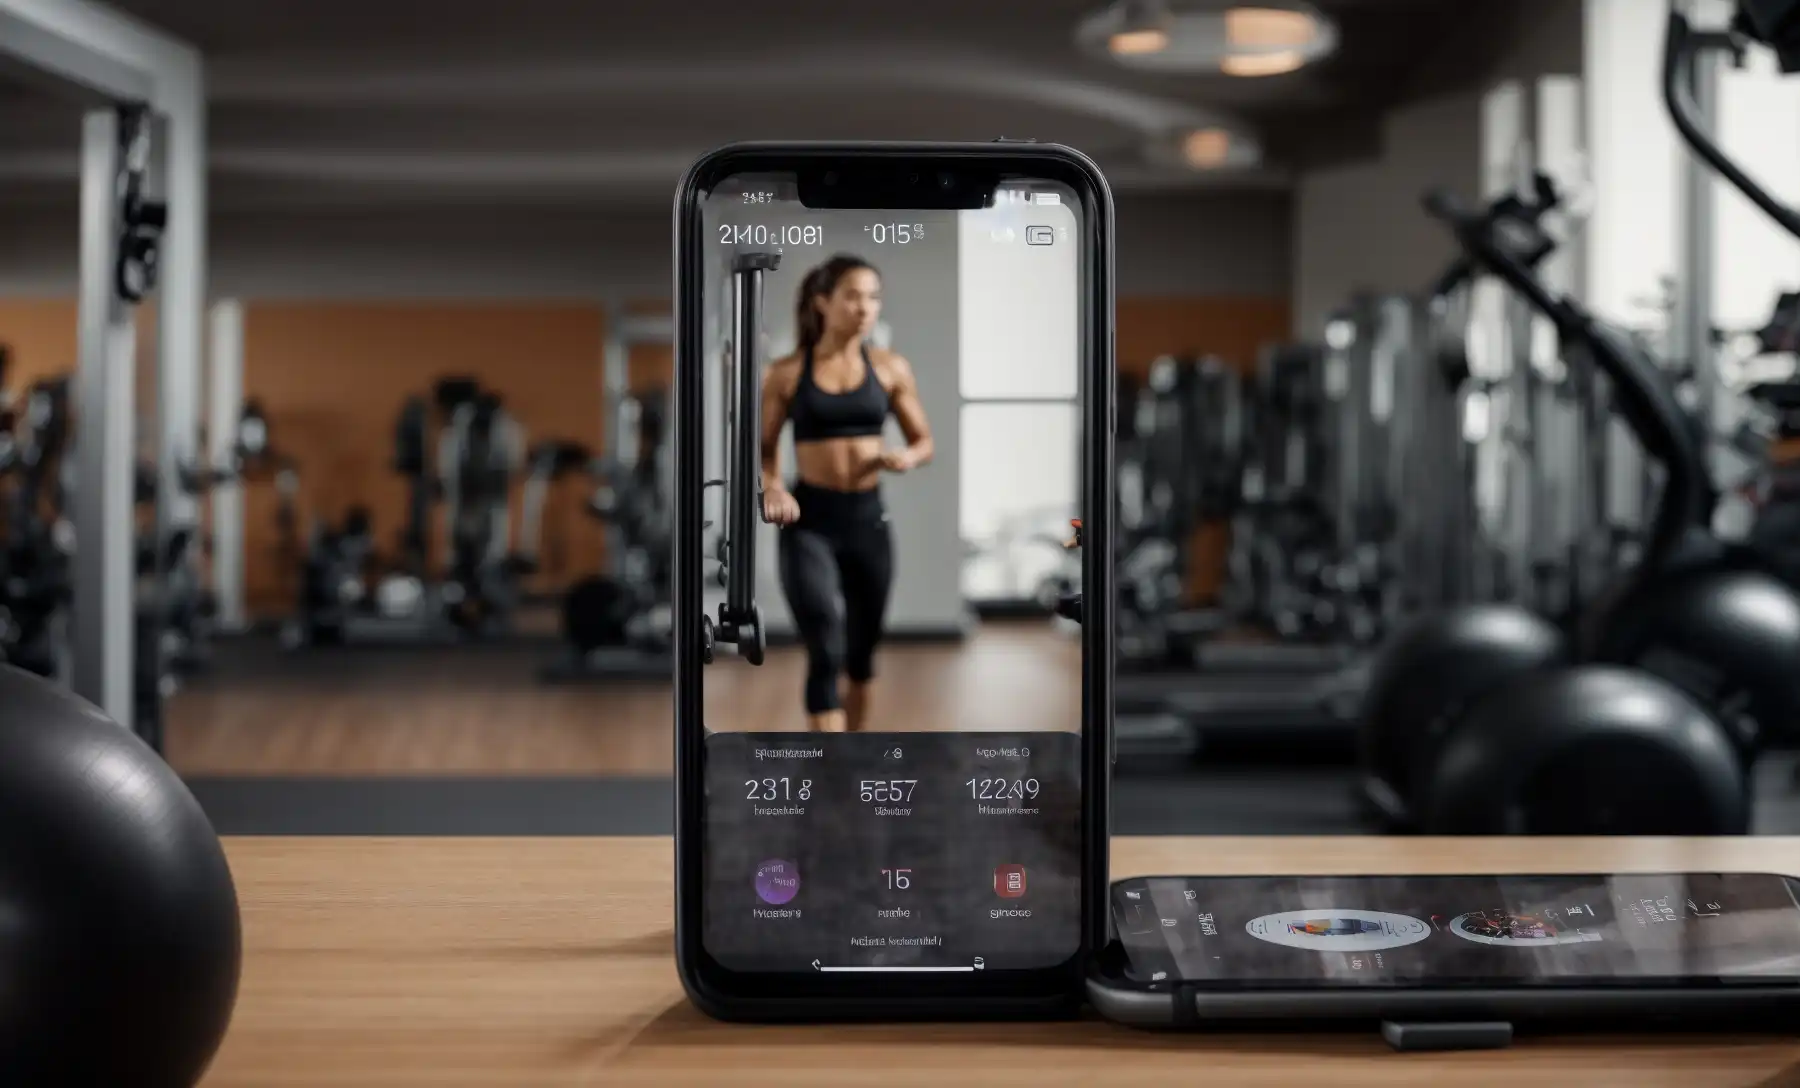 How to Manually Add Workout to Fitness App